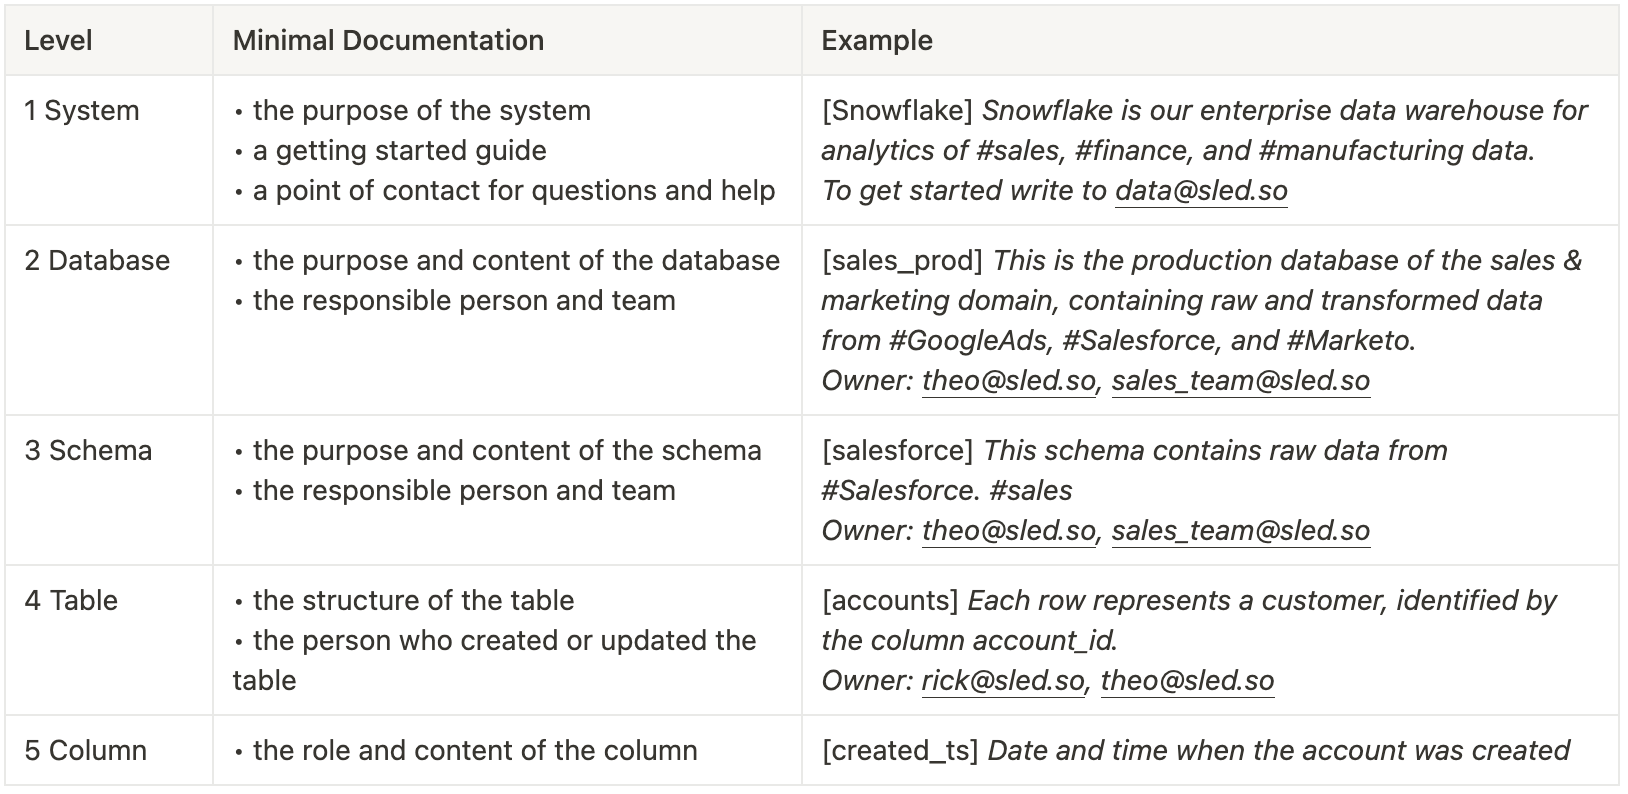 a table with 5 steps to follow to document data correclty